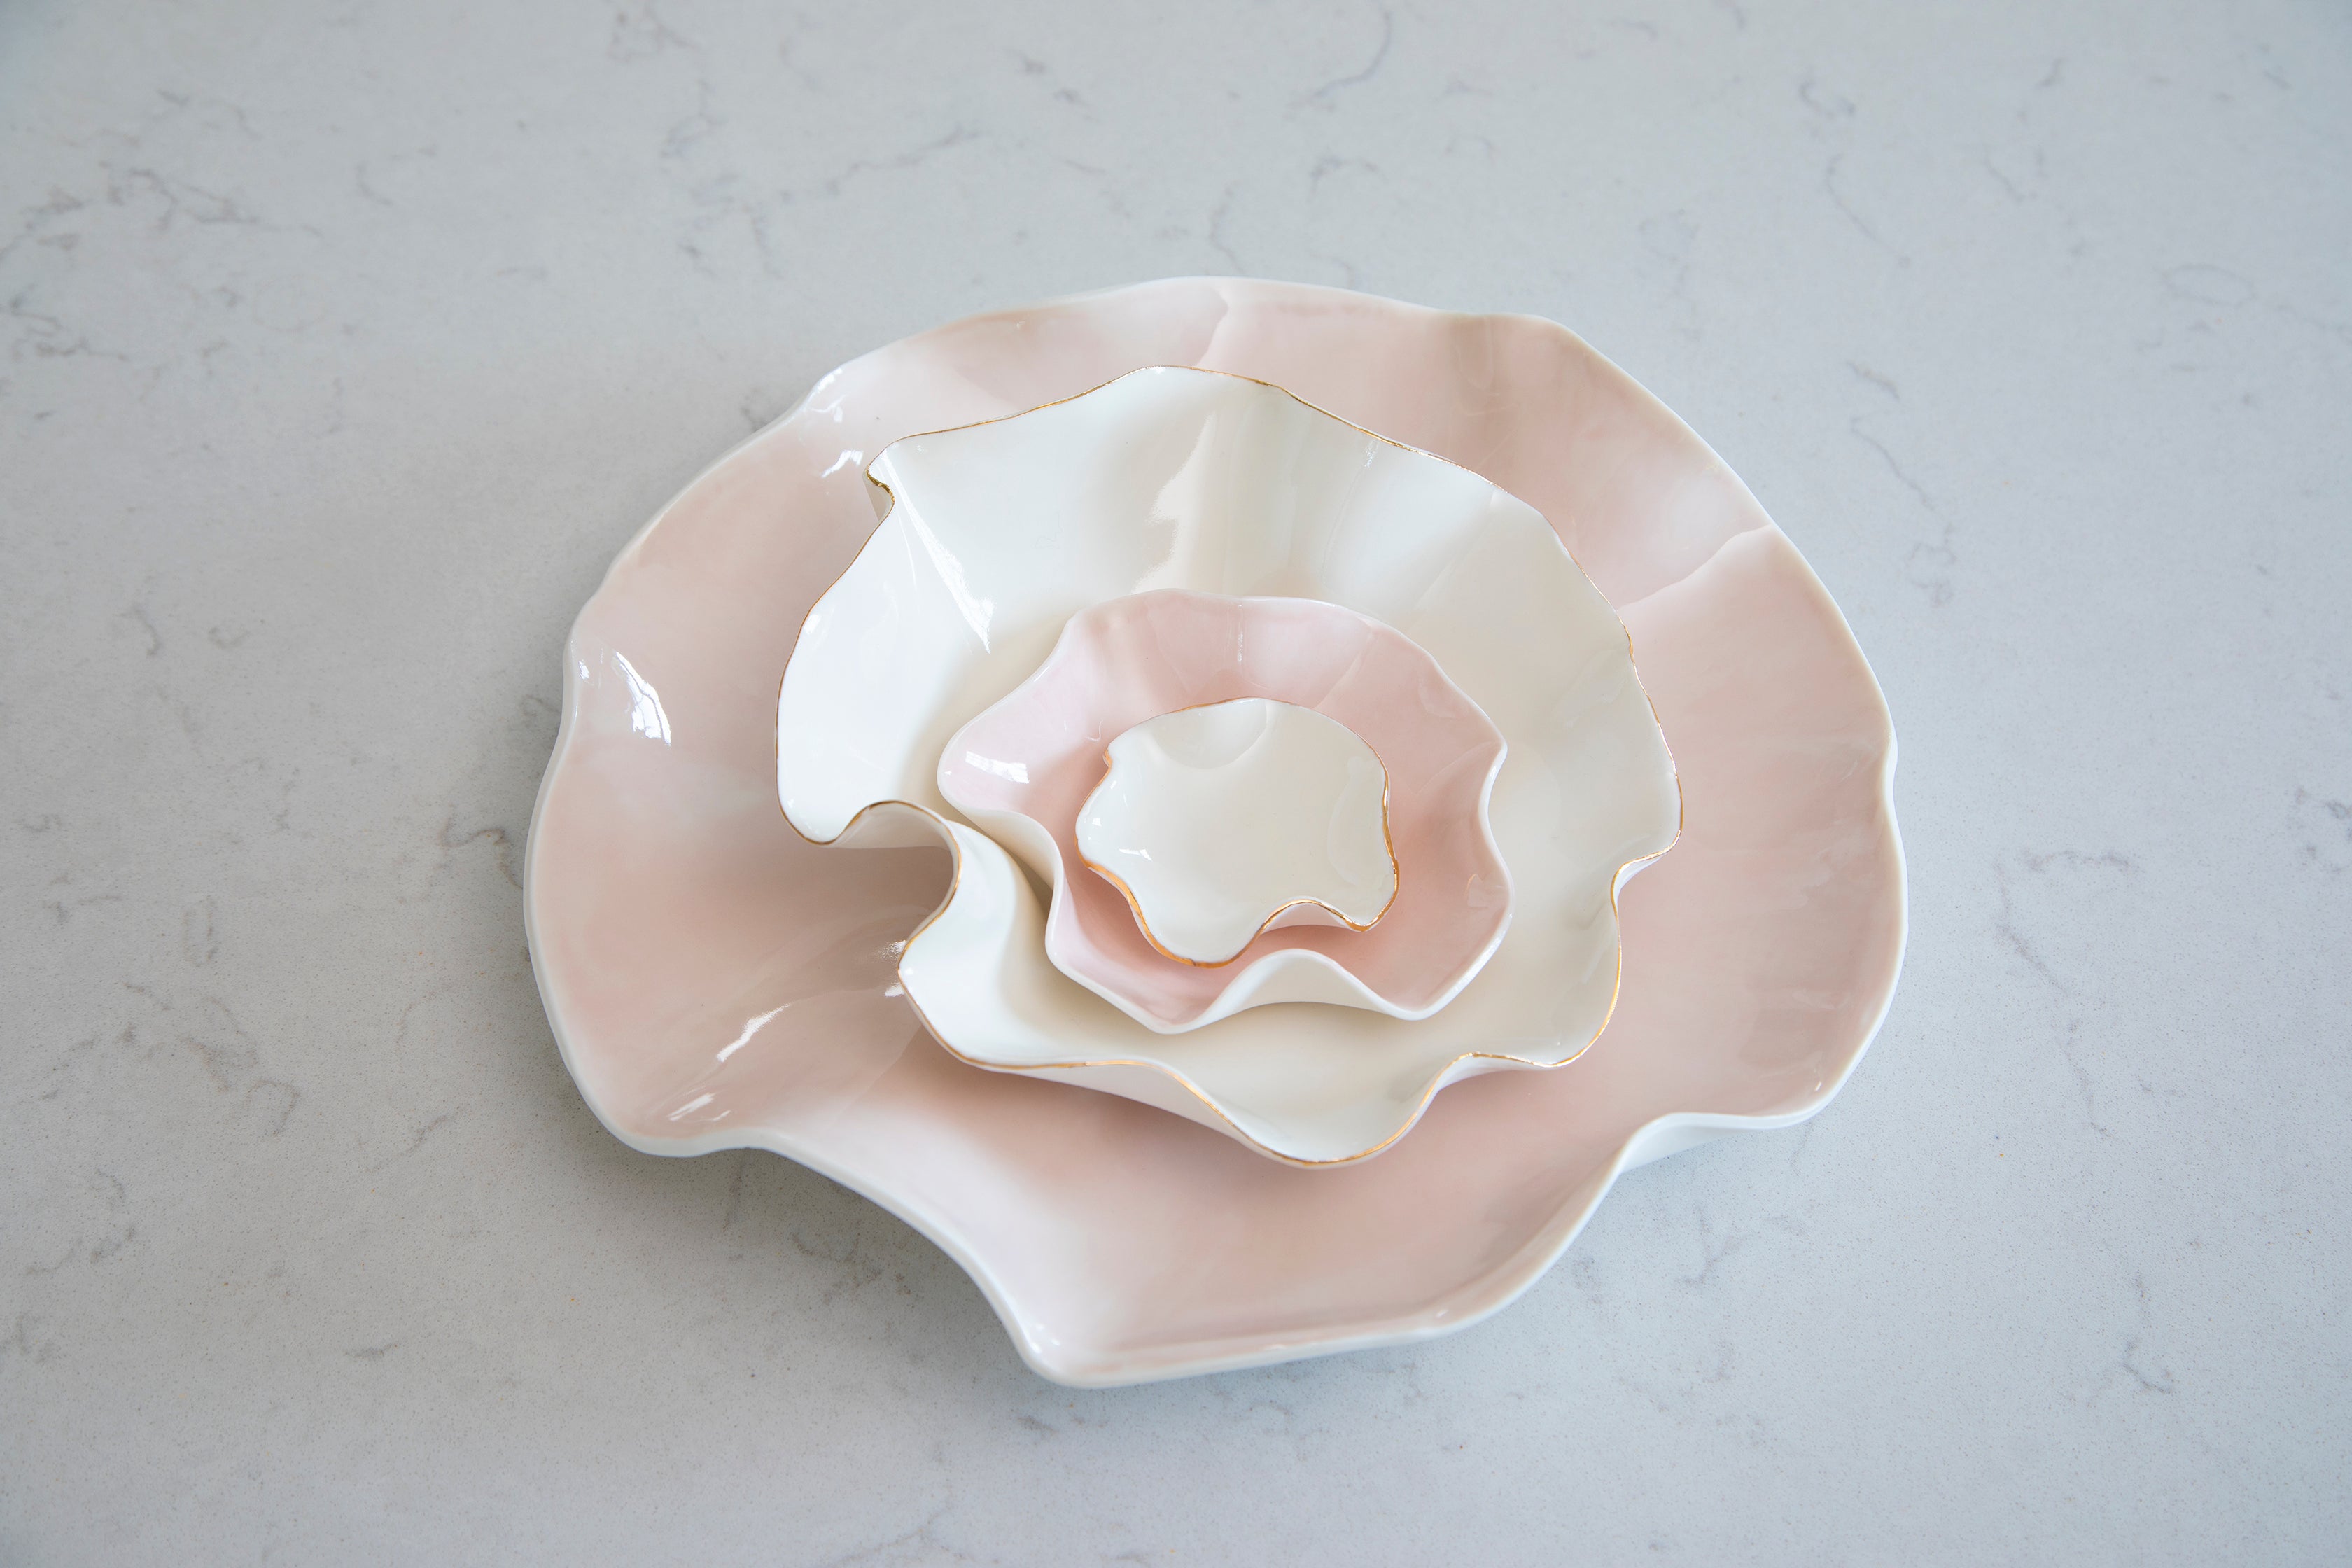 Nest of Joanna Ling bowls in white and pink